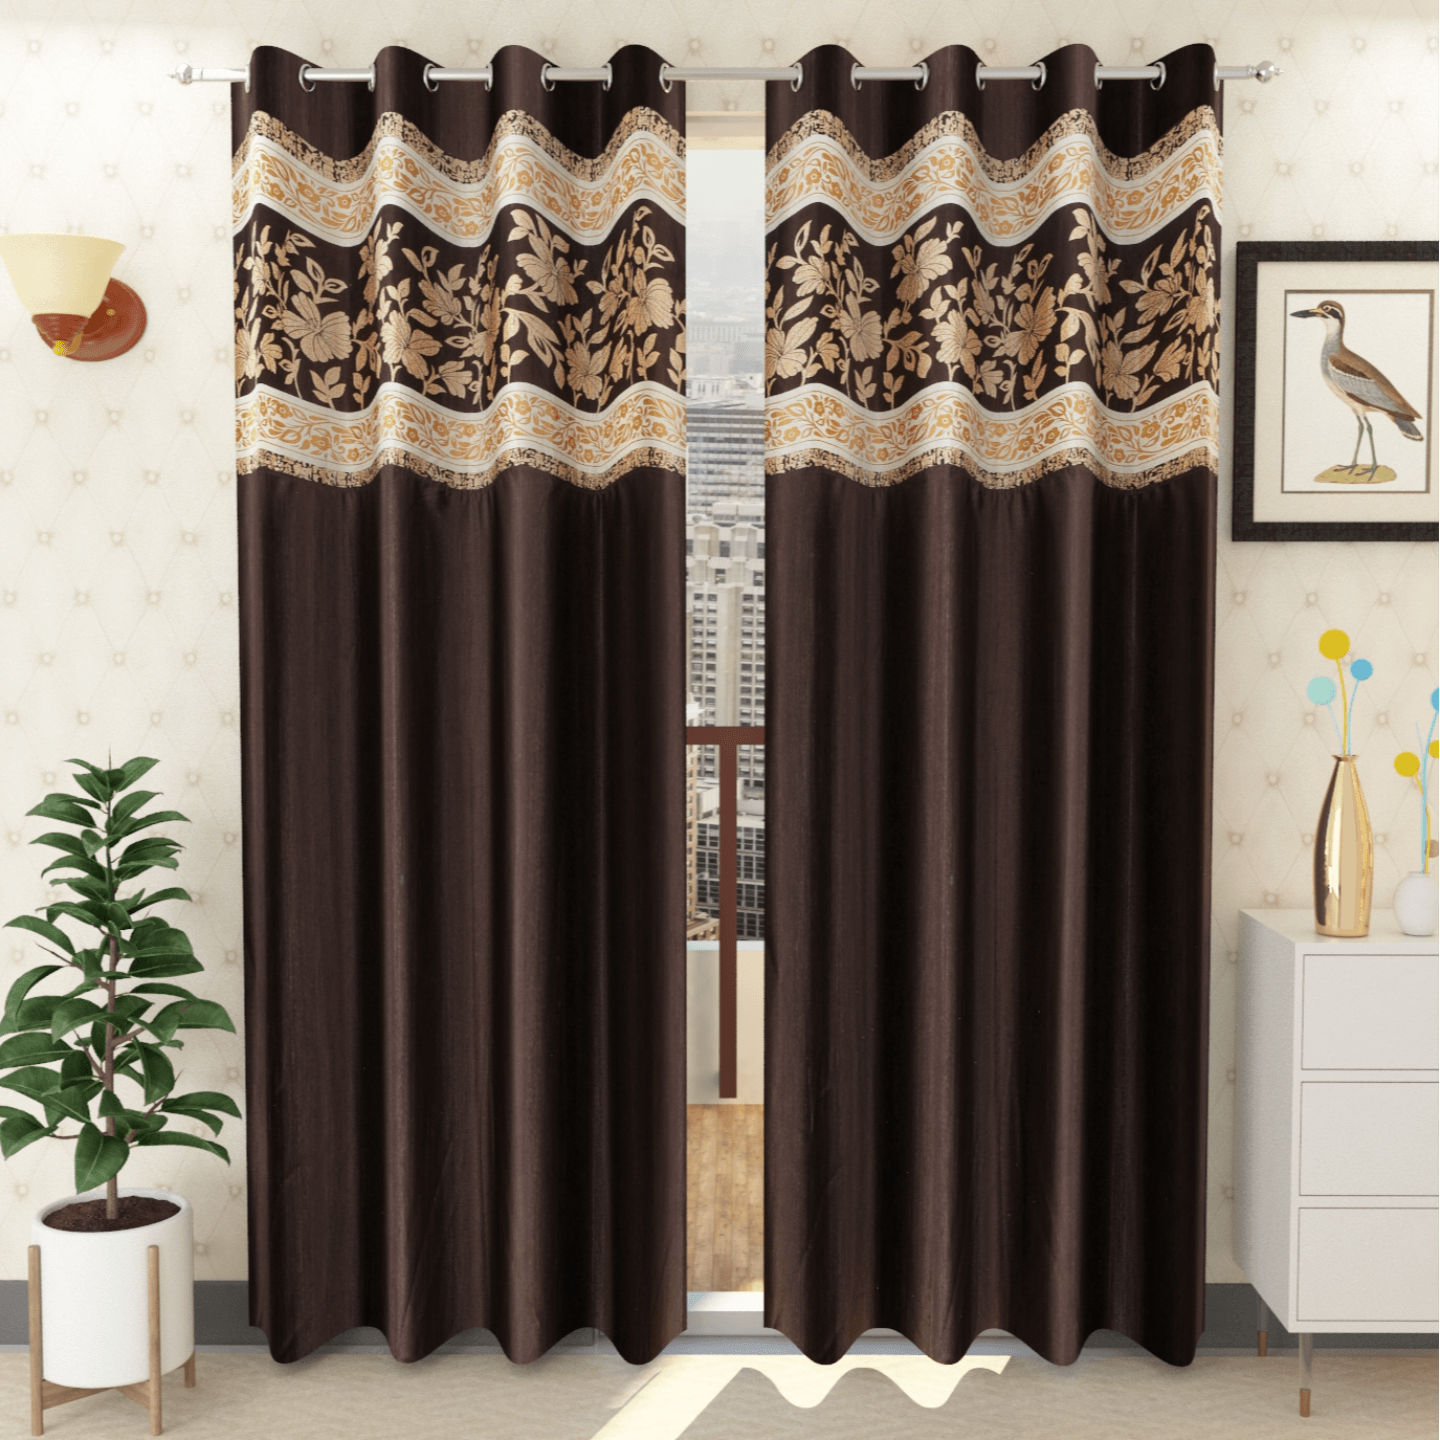 Handtex Home Patchwork curtain for door 9 feet set of 2pc Coffee color